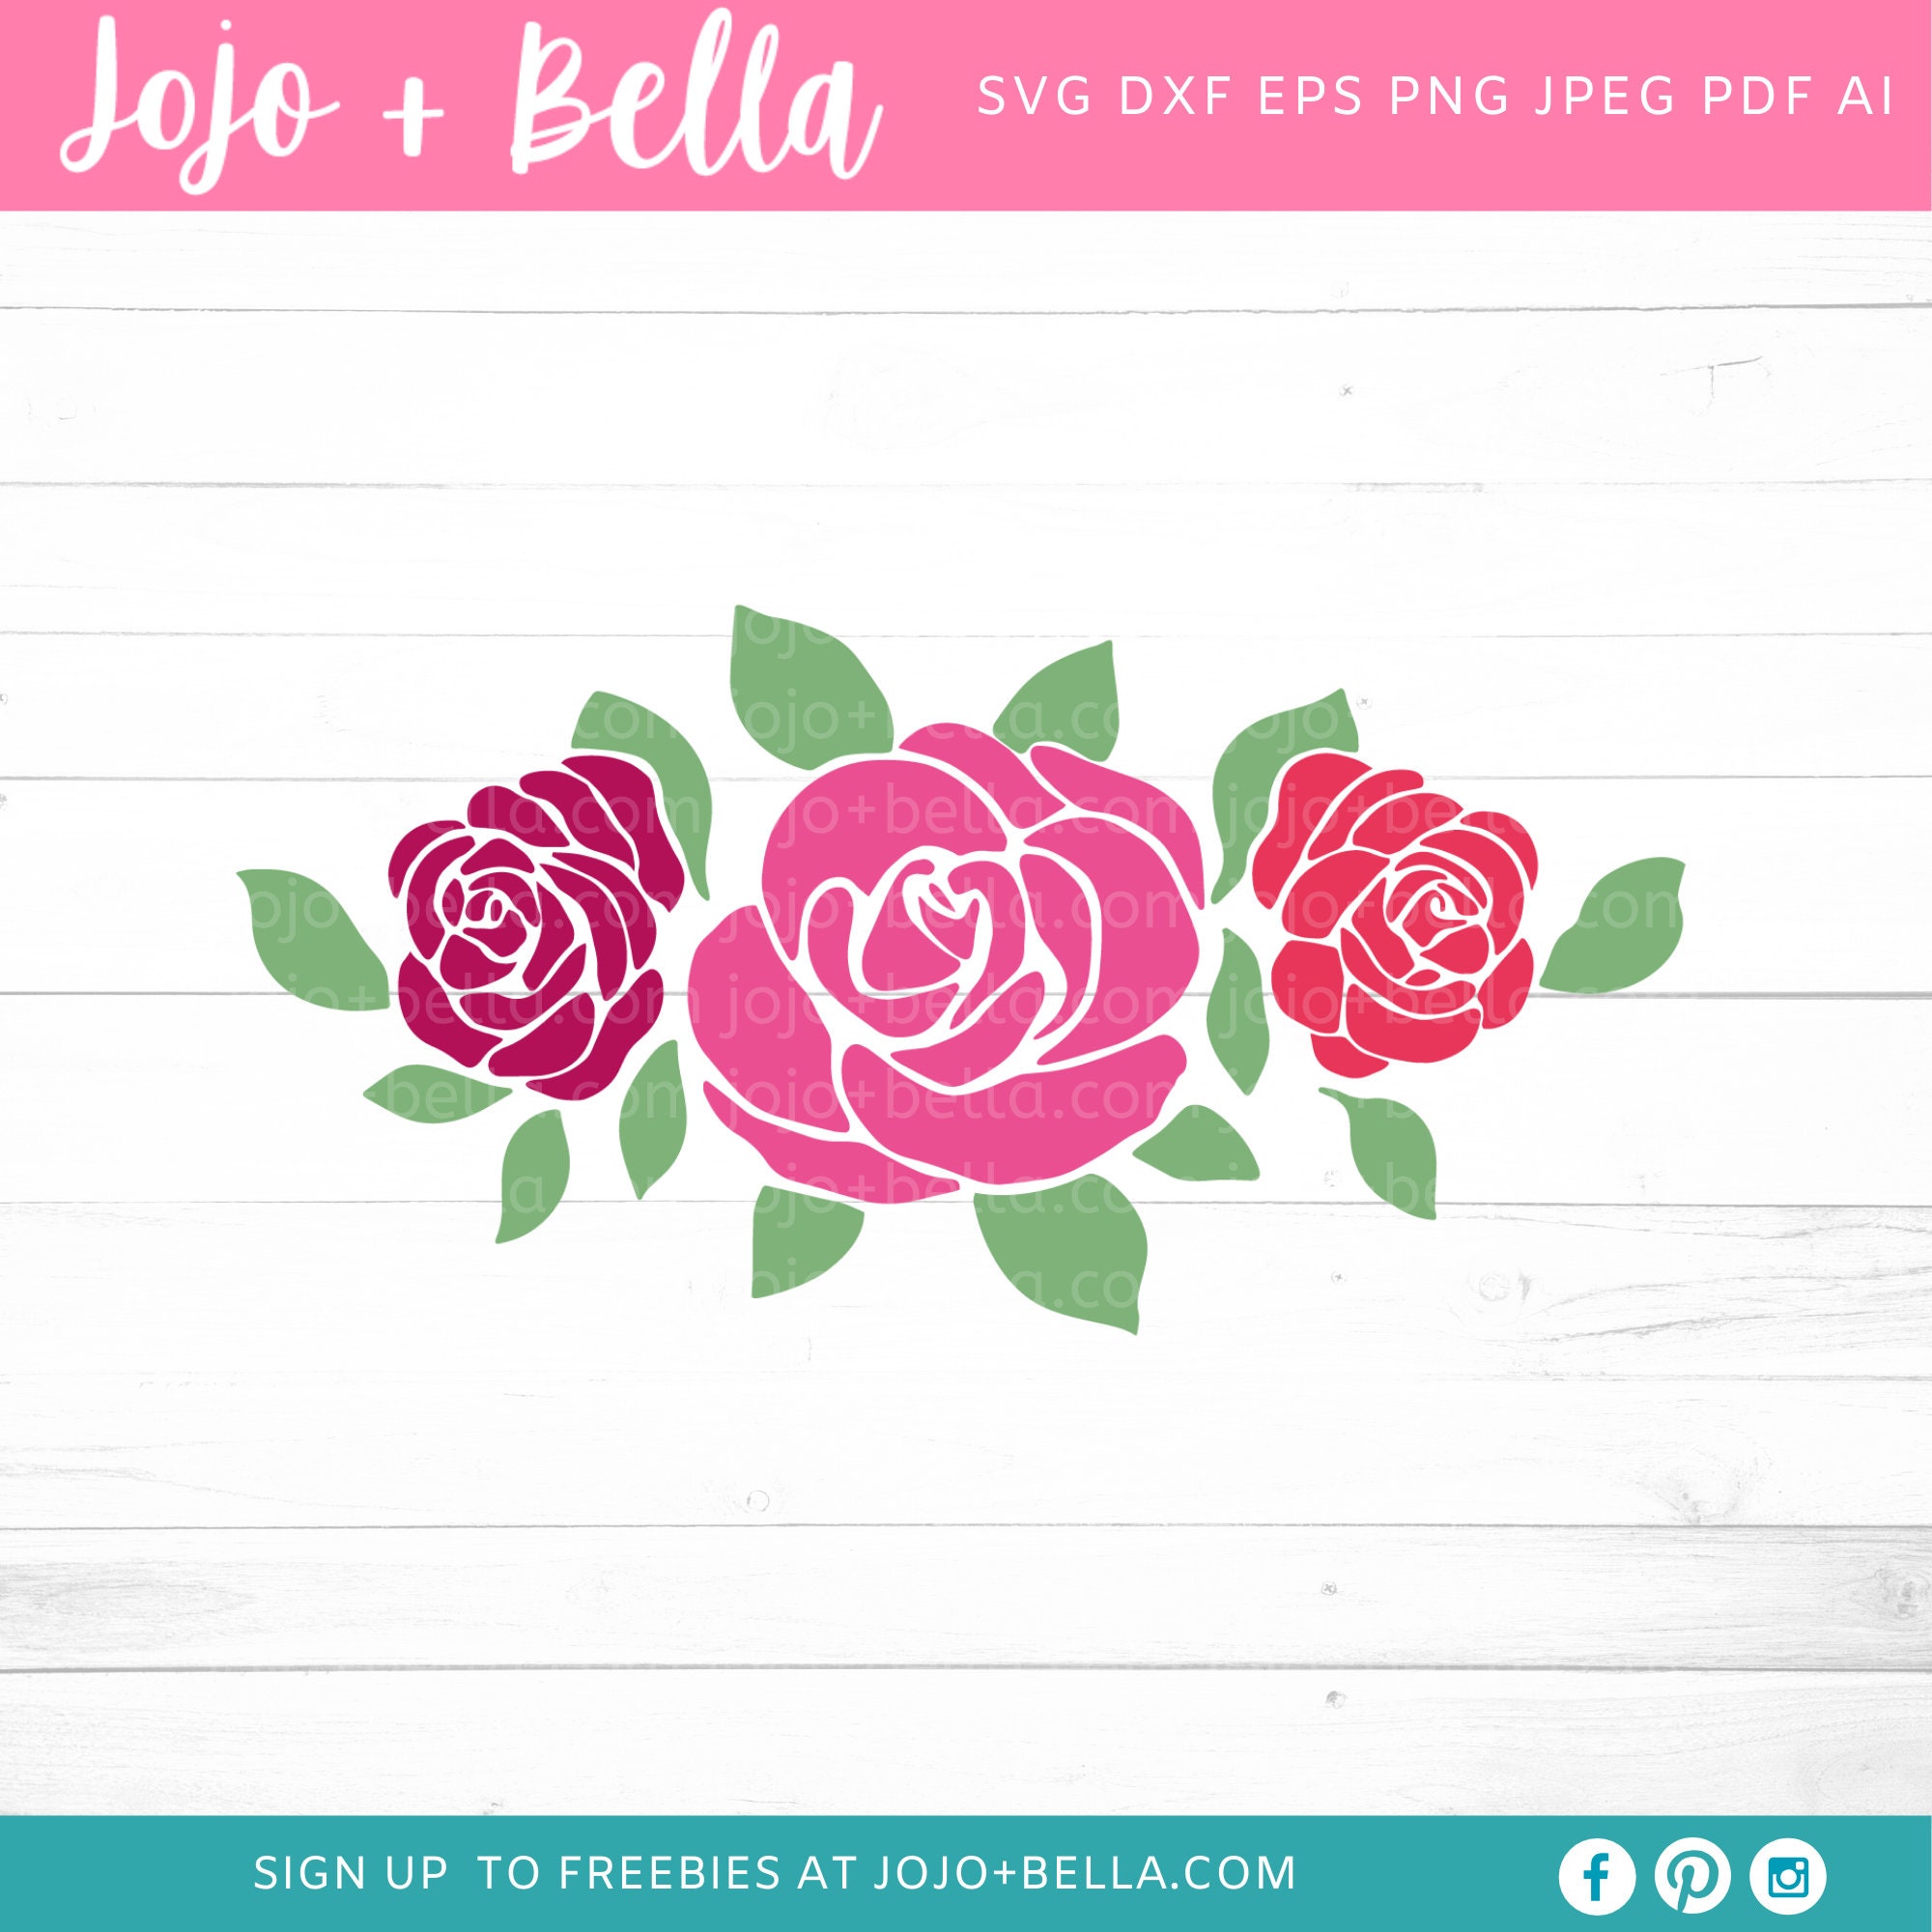 Rose SVG, Rose Flower SVG Bundle Graphic by Dev Teching · Creative Fabrica